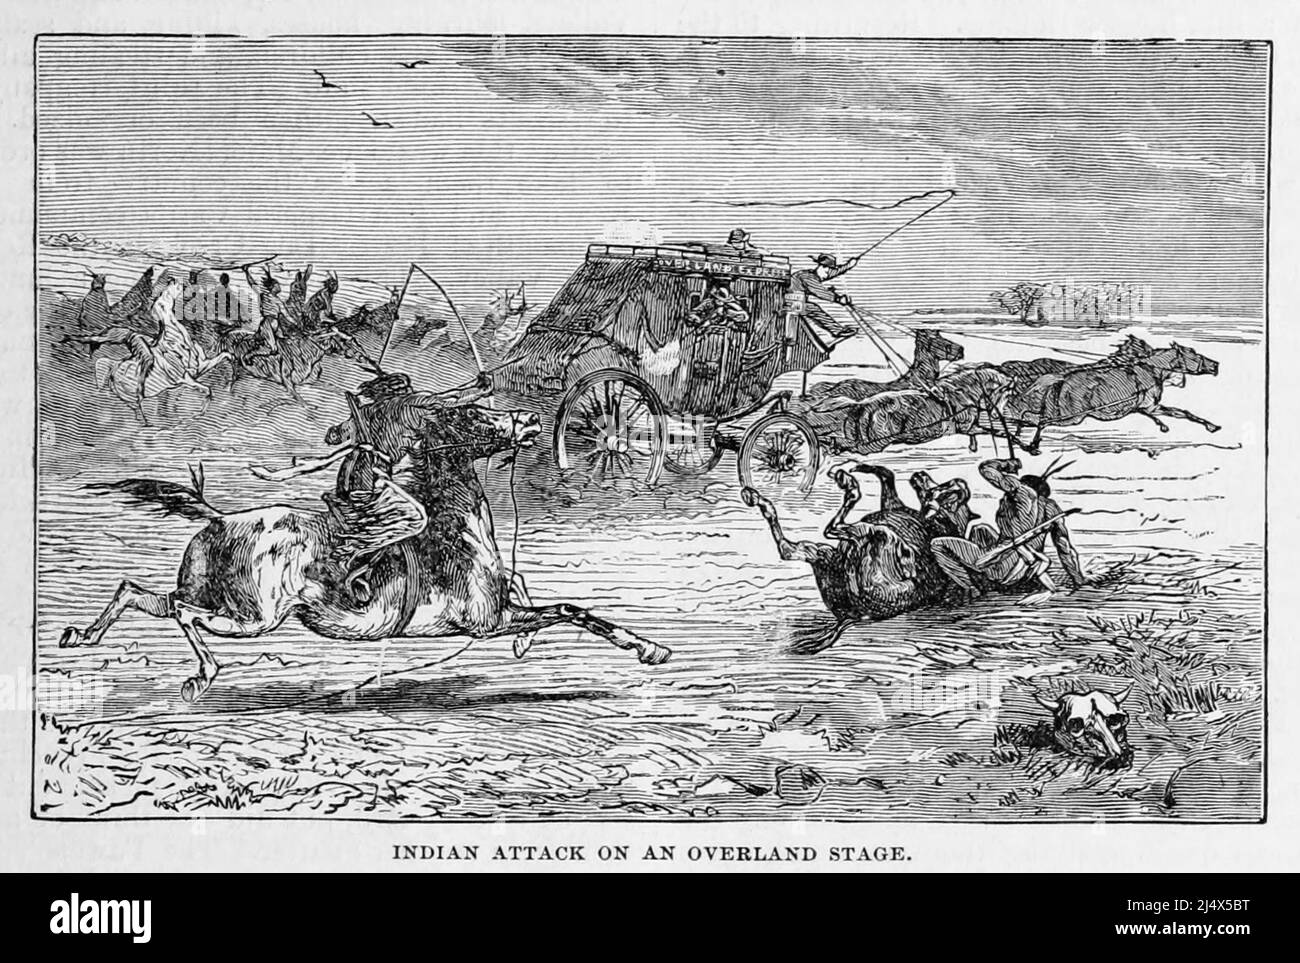 Indian Attack on an Overland Stage from the book The Pacific tourist :  Adams & Bishop's illustrated trans-continental guide of travel, from the  Atlantic to the Pacific Ocean : containing full descriptions